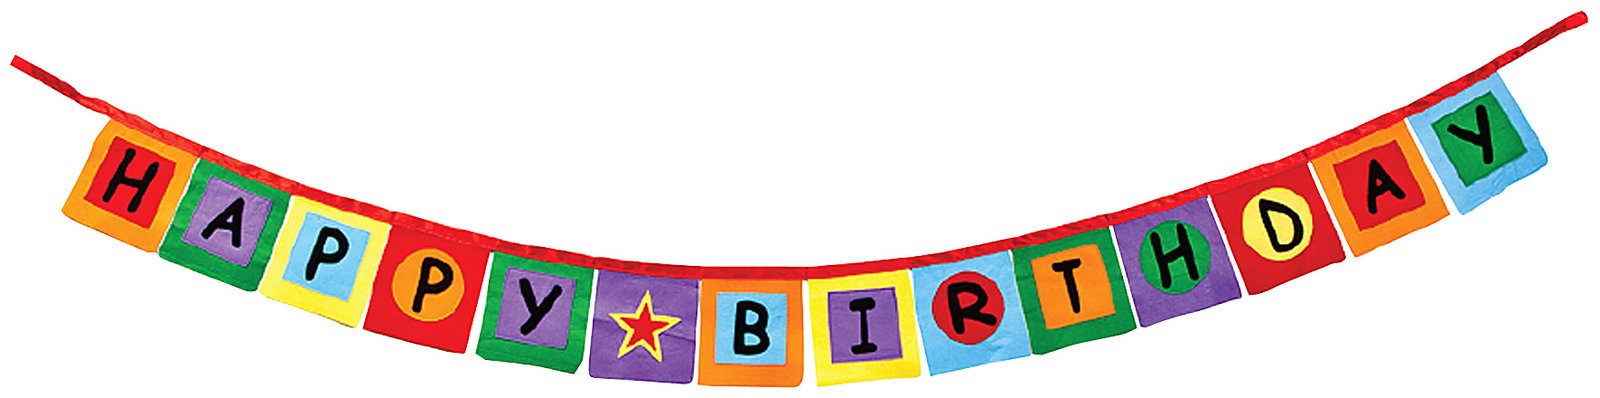 Happy Birthday Banner Clipart   Clipart Panda   Free Clipart Images